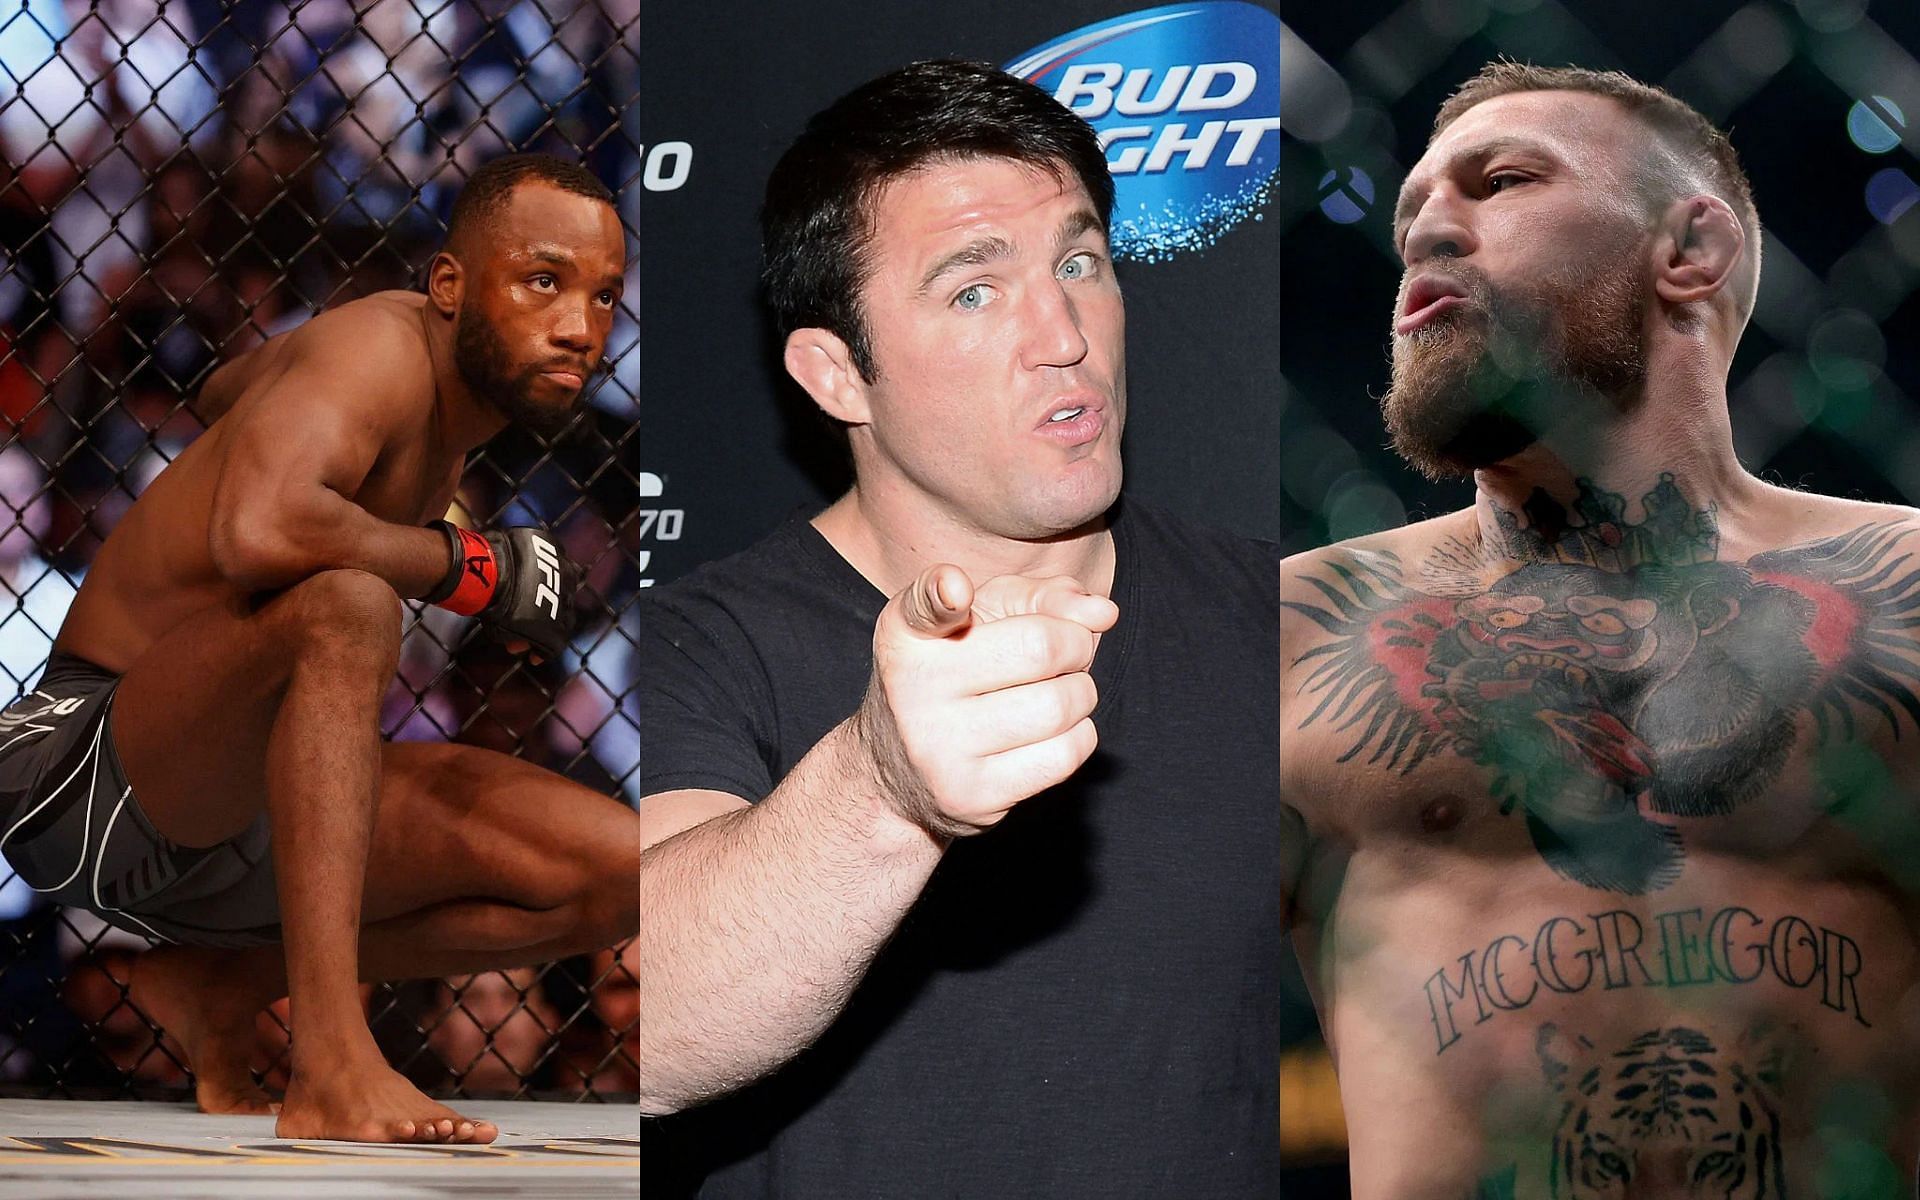 Leon Edwards (Left), Chael Sonnen (Middle), and Conor McGregor (Right) (Images courtesy of Getty)